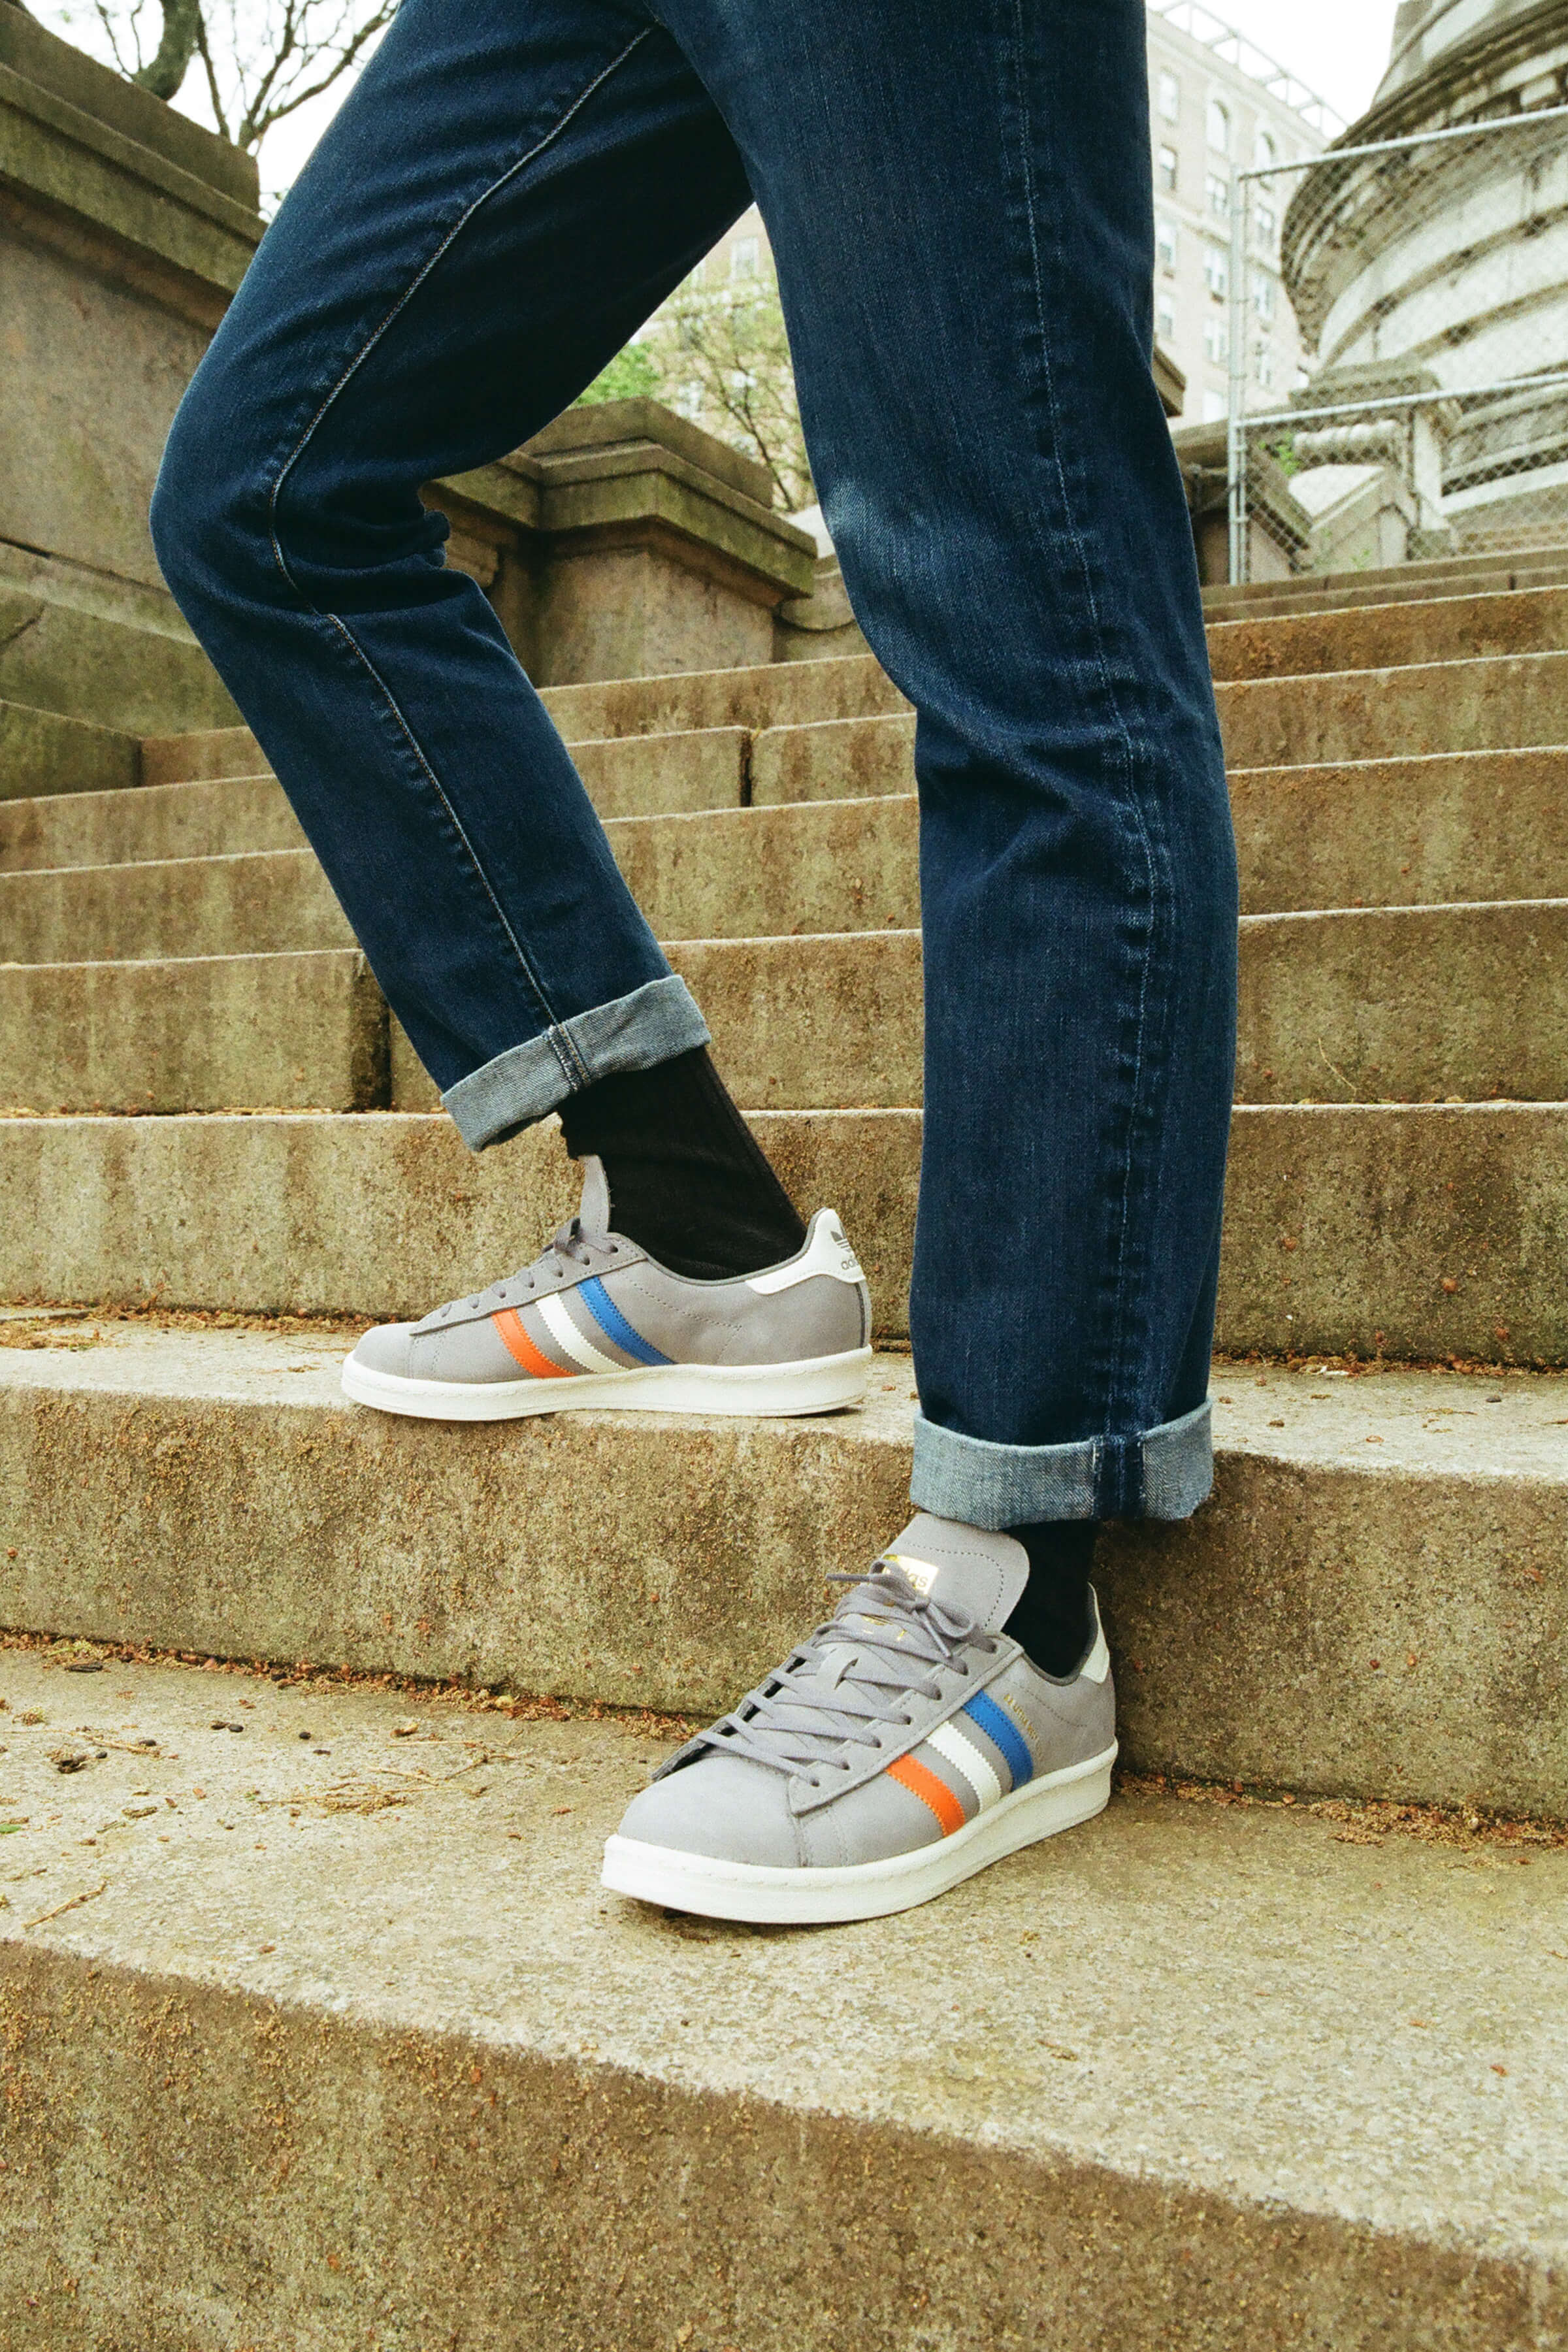 Find the Campus 80s by Sneakersnstuff and adidas Originals here. - SNS